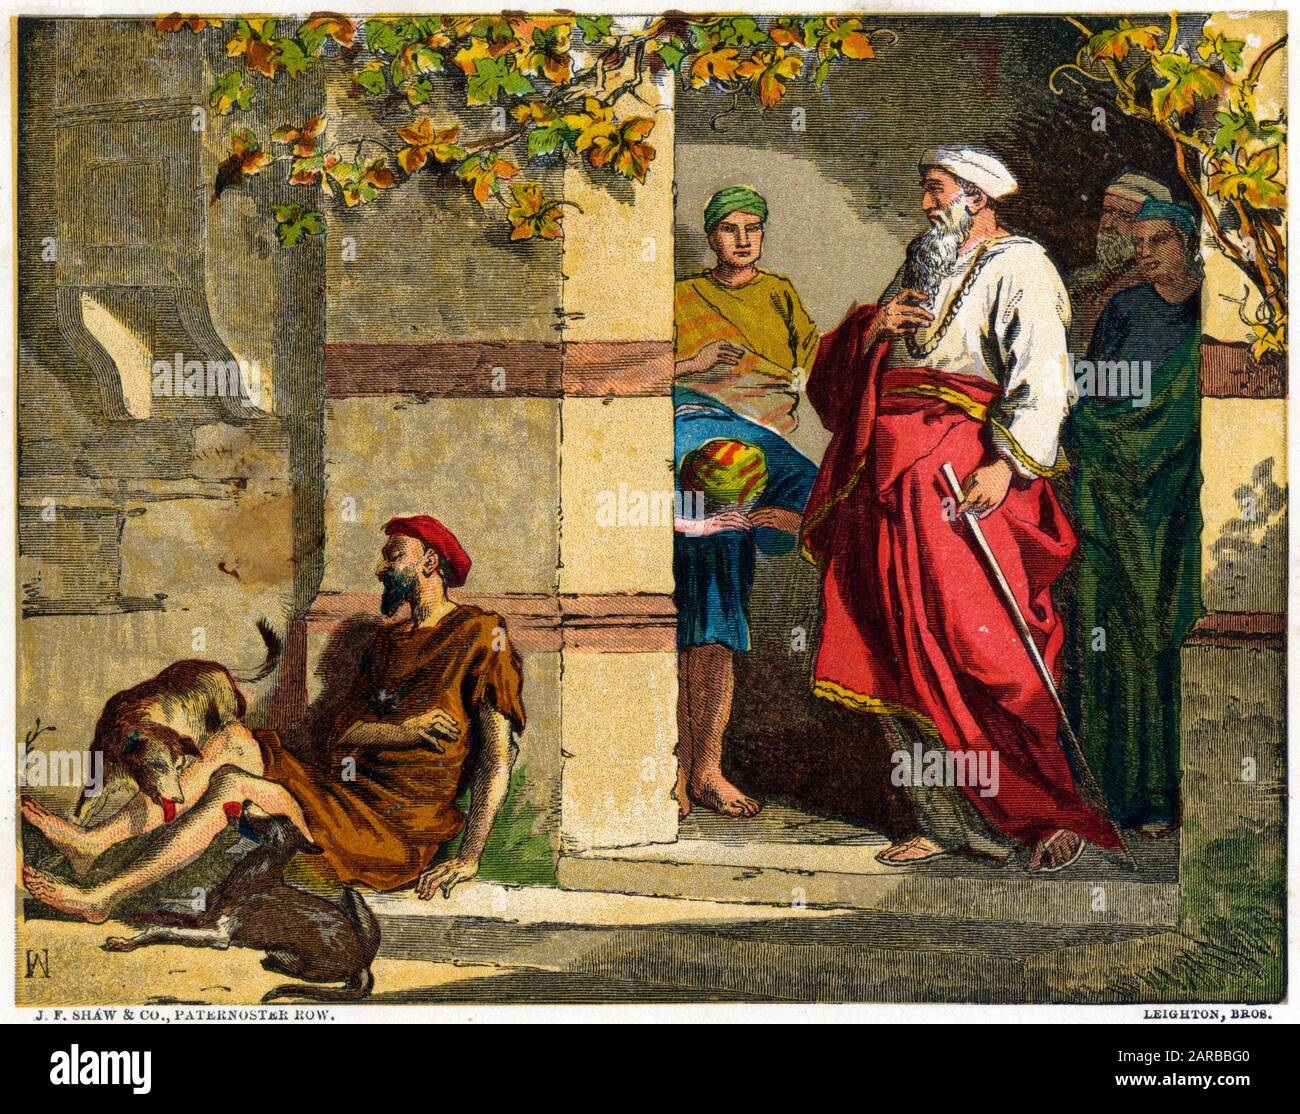 the parable of lazarus and the rich man 2arbbg0